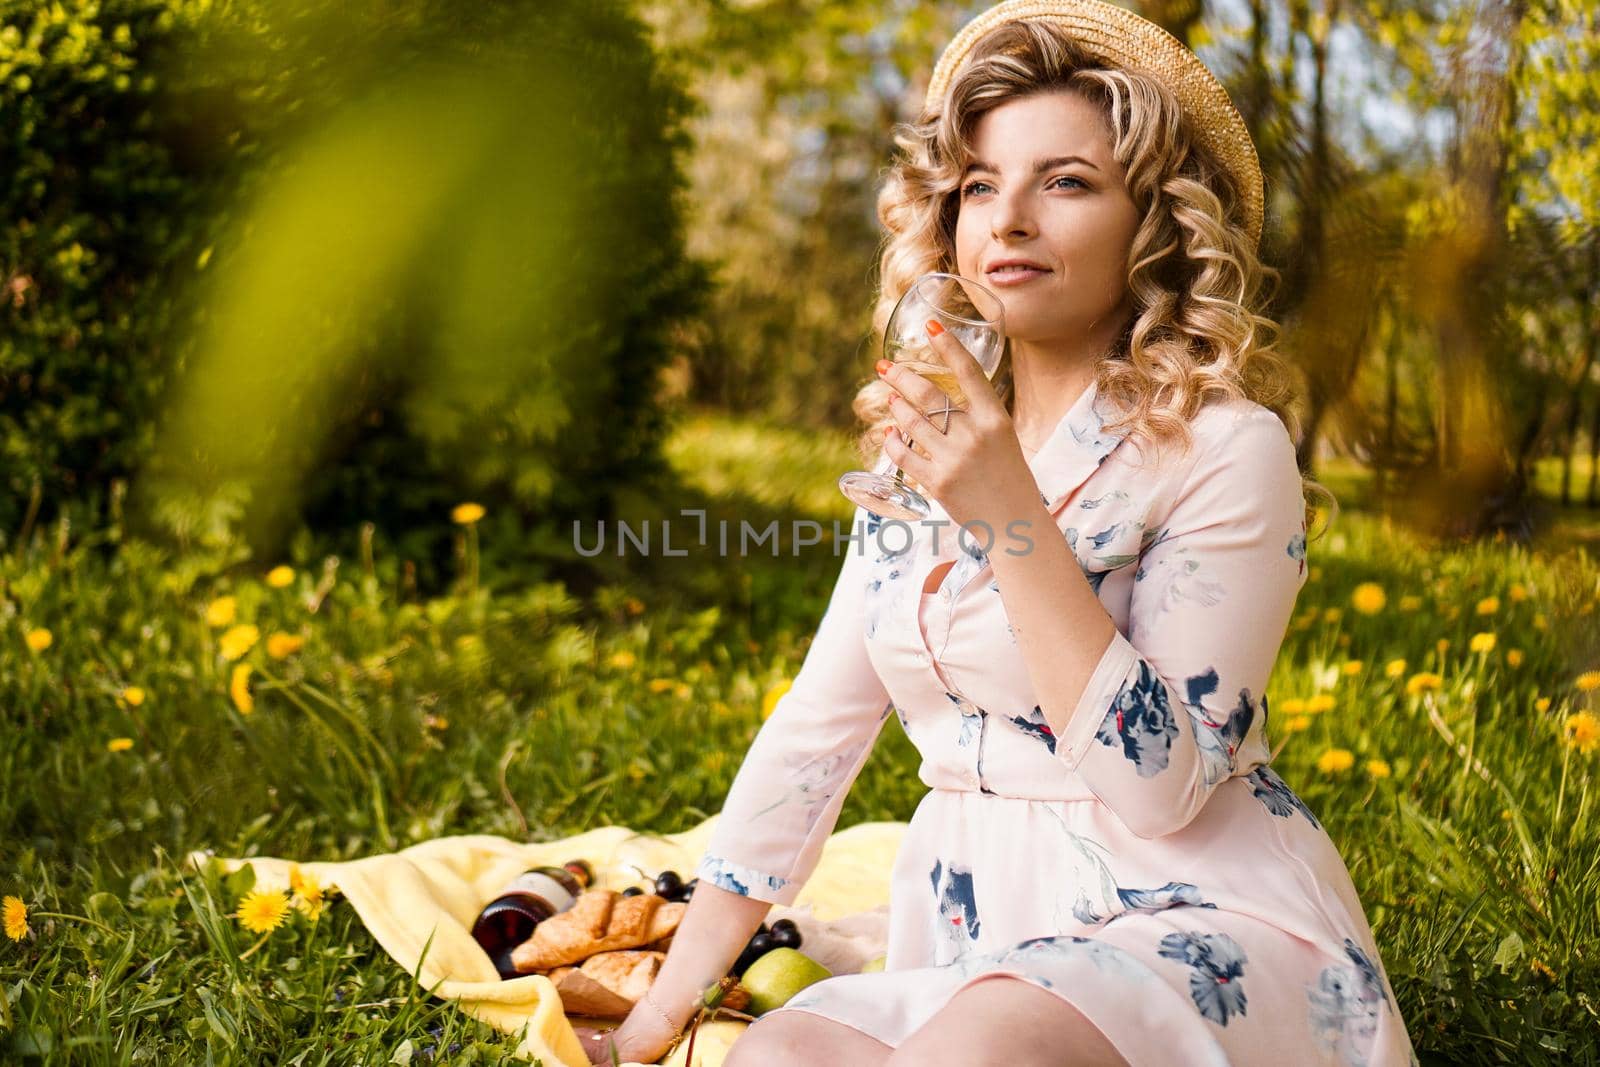 Beautiful young woman with blonde hair in straw hat drinks wine in the garden by natali_brill